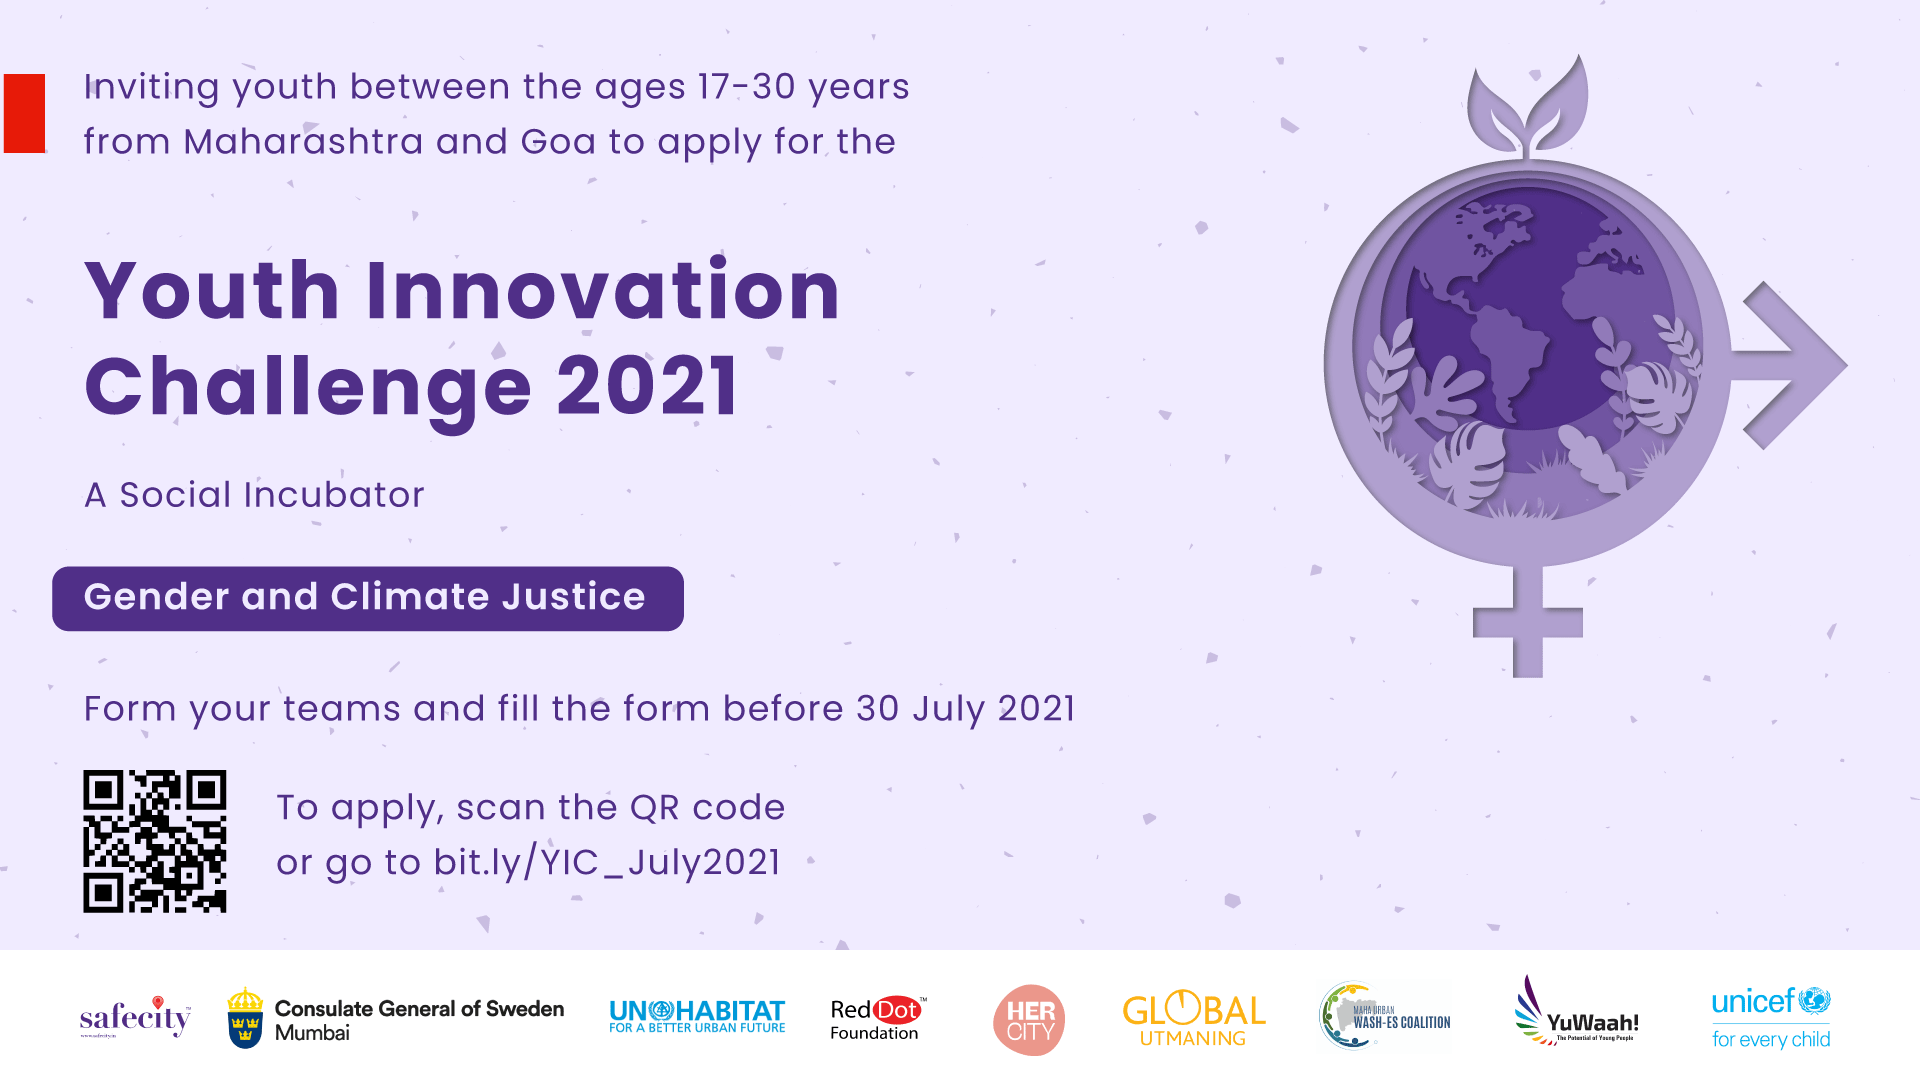 Youth Innovation Challenge 2021